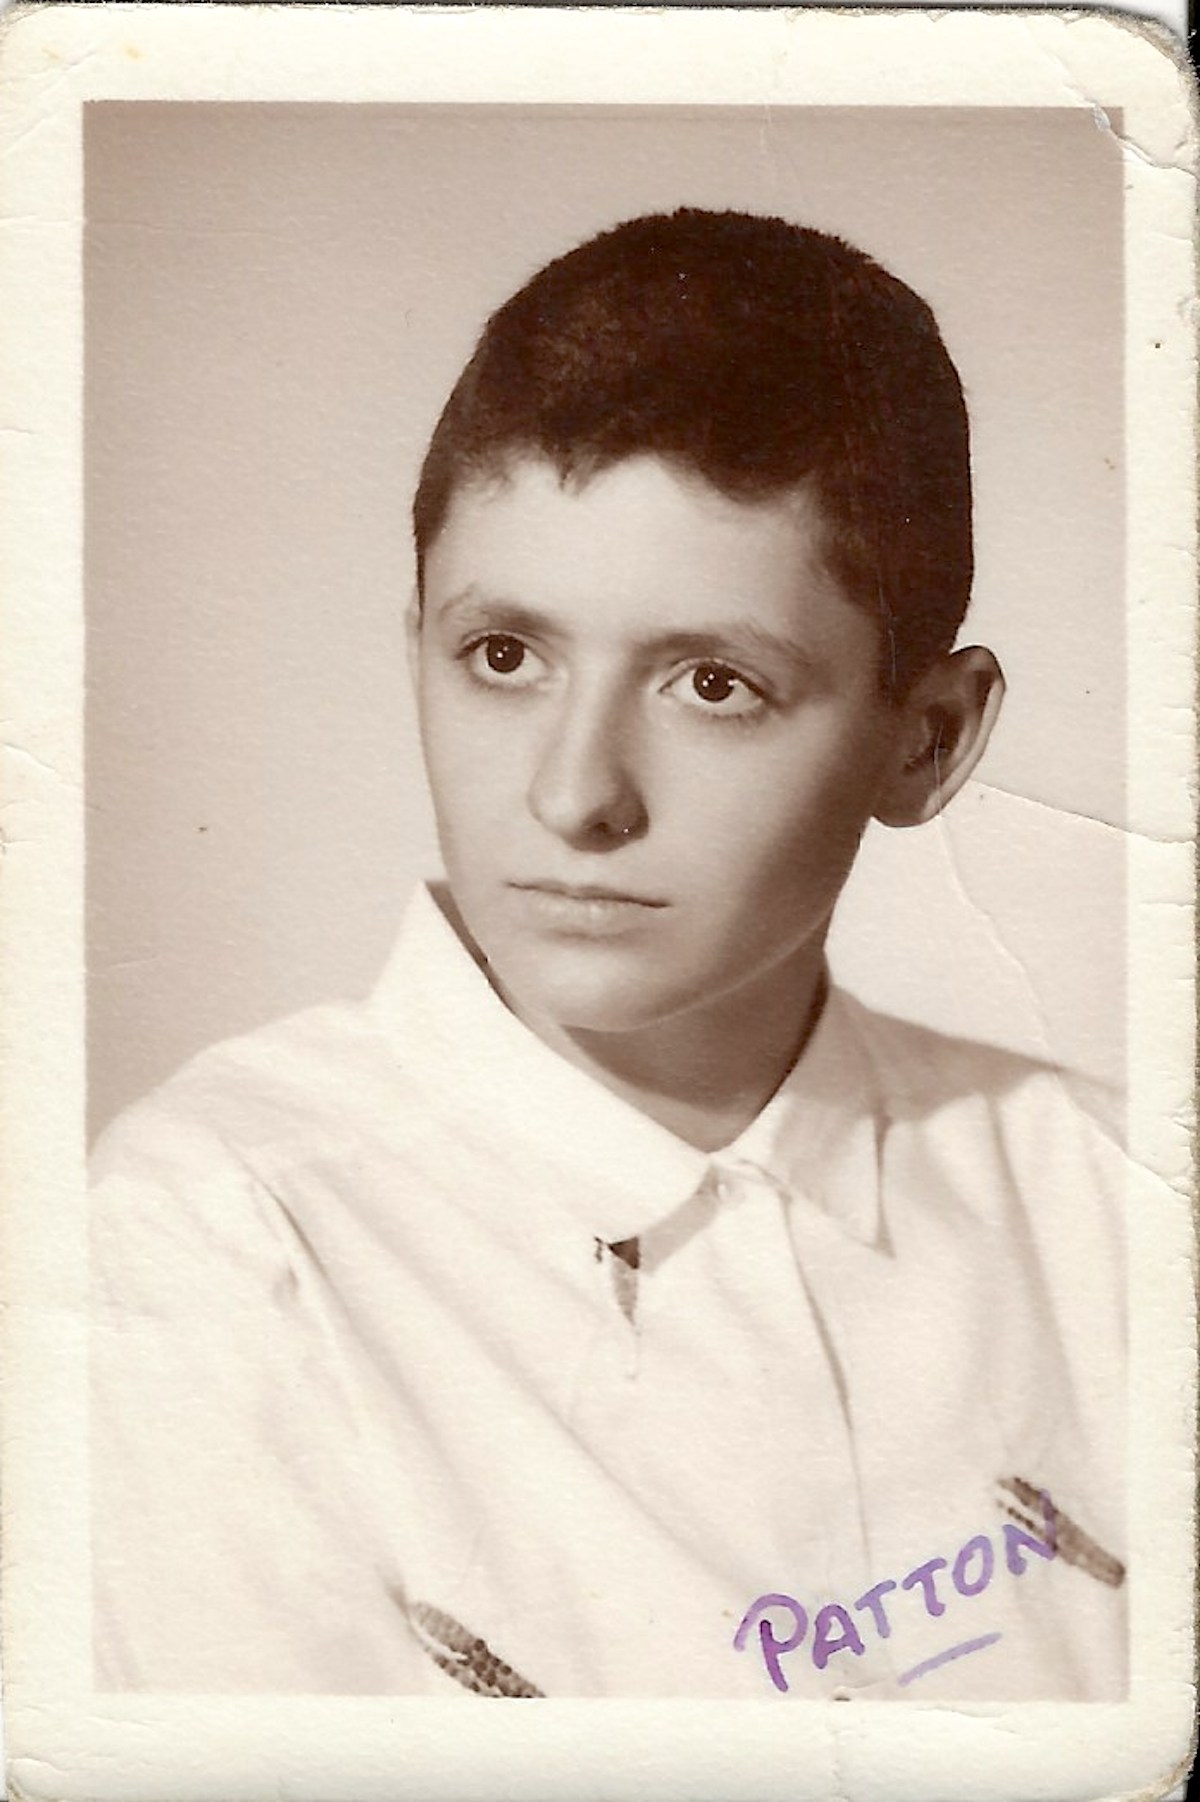 A yearbook portrait of Jude during his senior year of high school, 1958. Photo courtesy of Jude Patton.